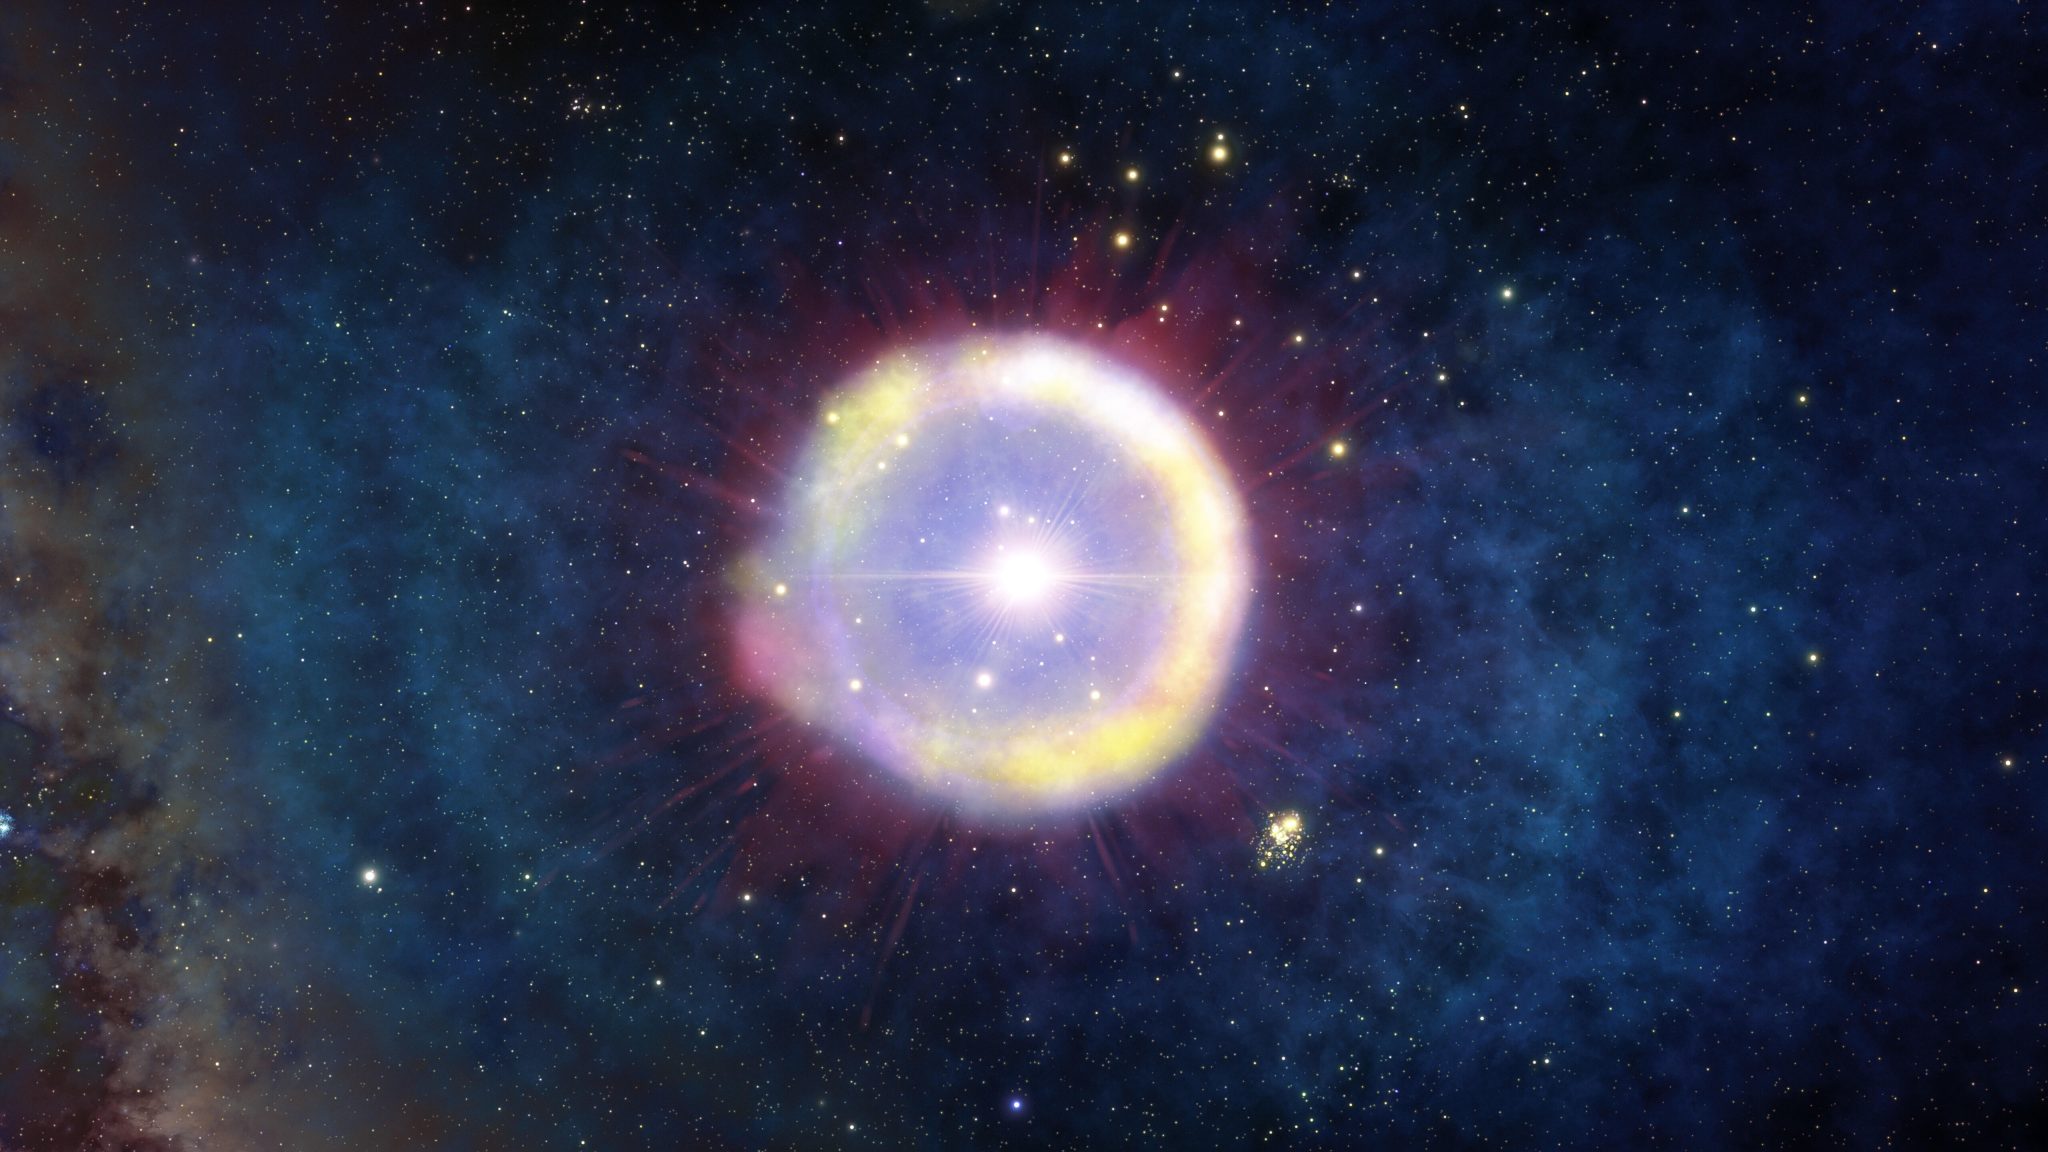 Huge, Population III star in the early universe